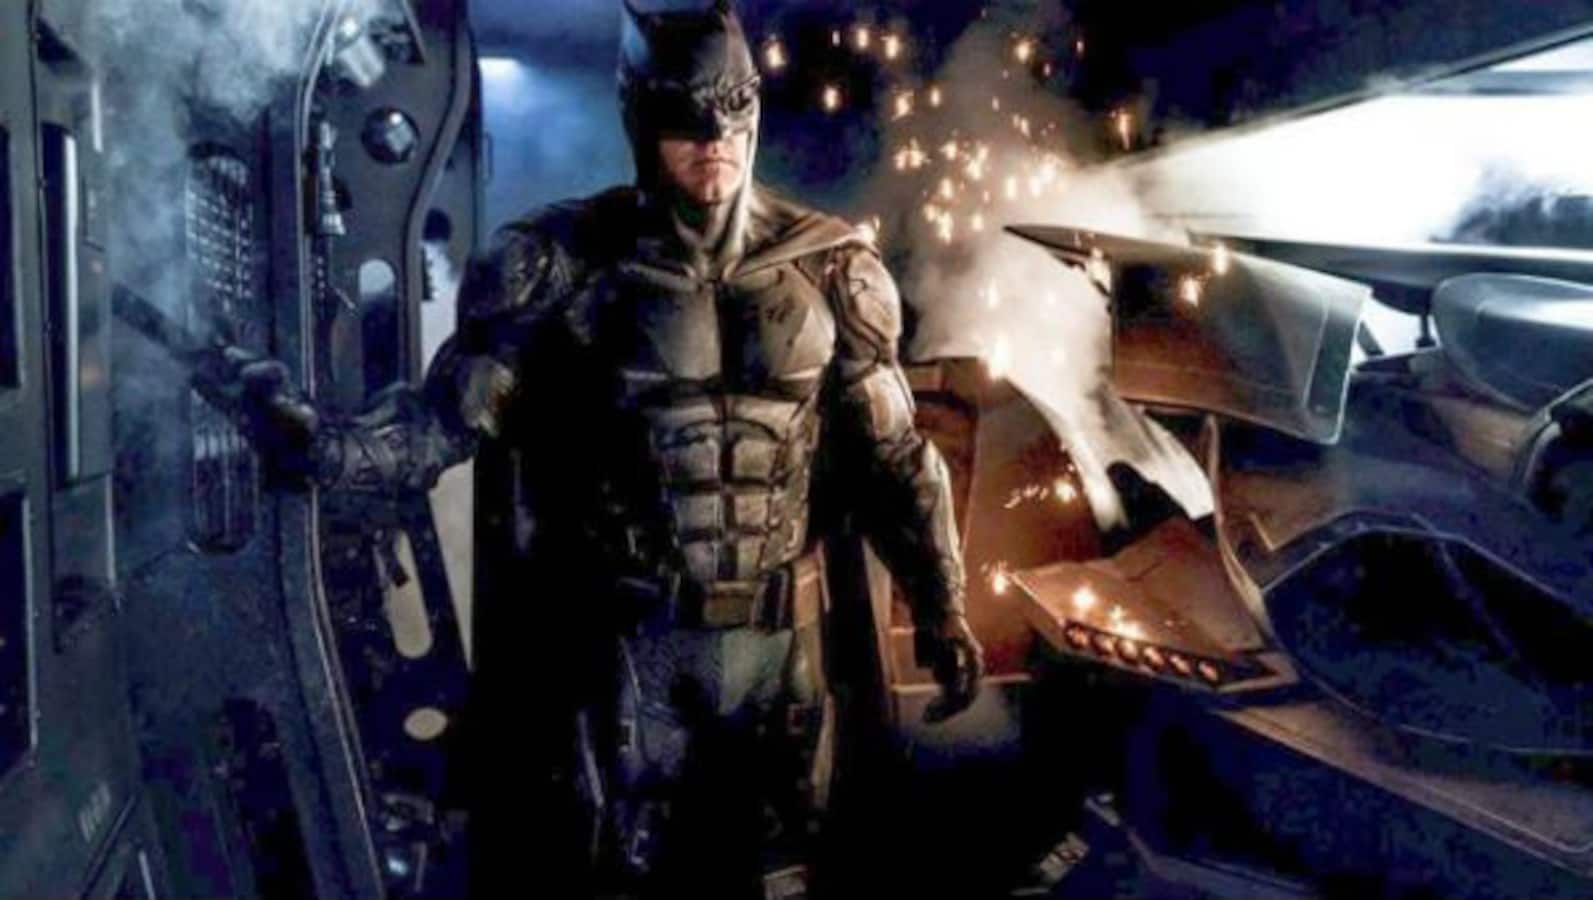 Ben Affleck's new Batman suit inspired from Christian Bale's Batman and  Patrick Wilson's Nite Owl - view pic! - Bollywood News & Gossip, Movie  Reviews, Trailers & Videos at 